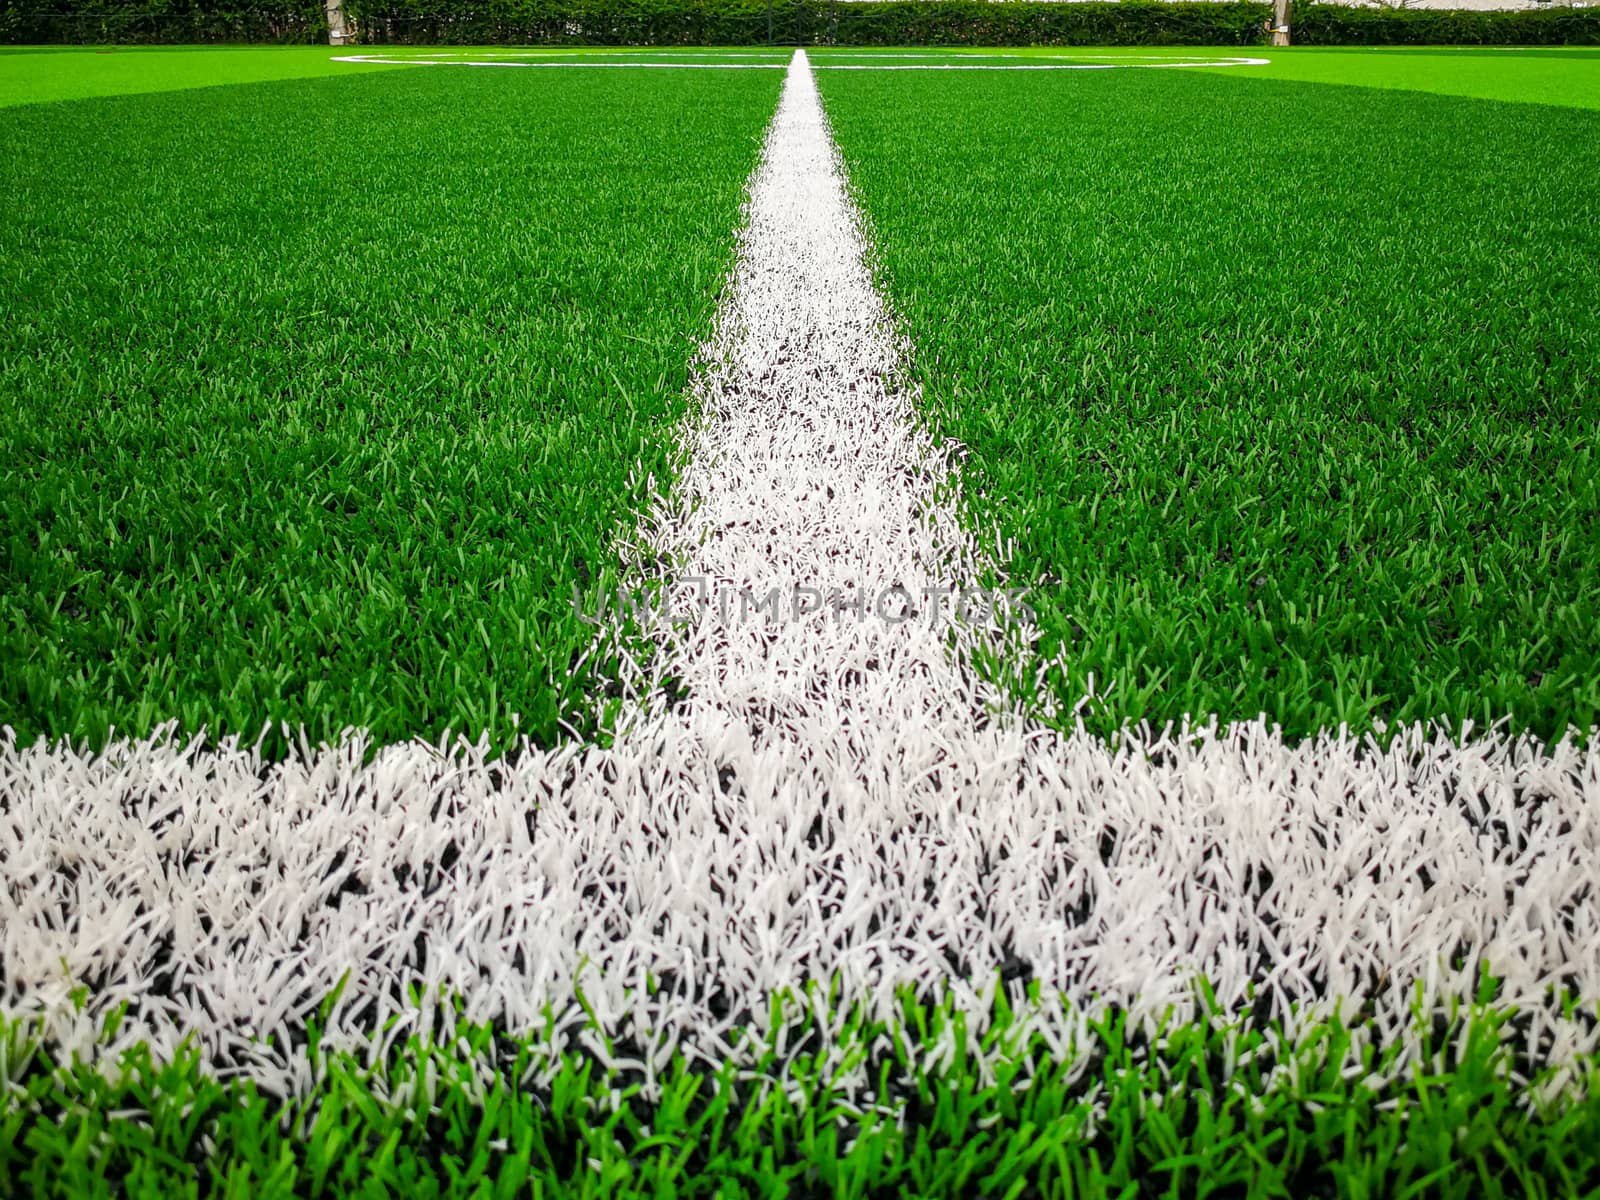 Football field, astro turf surface. Close up of throw in, kick off and corner area. Lushed green football pitch. by sonandonures